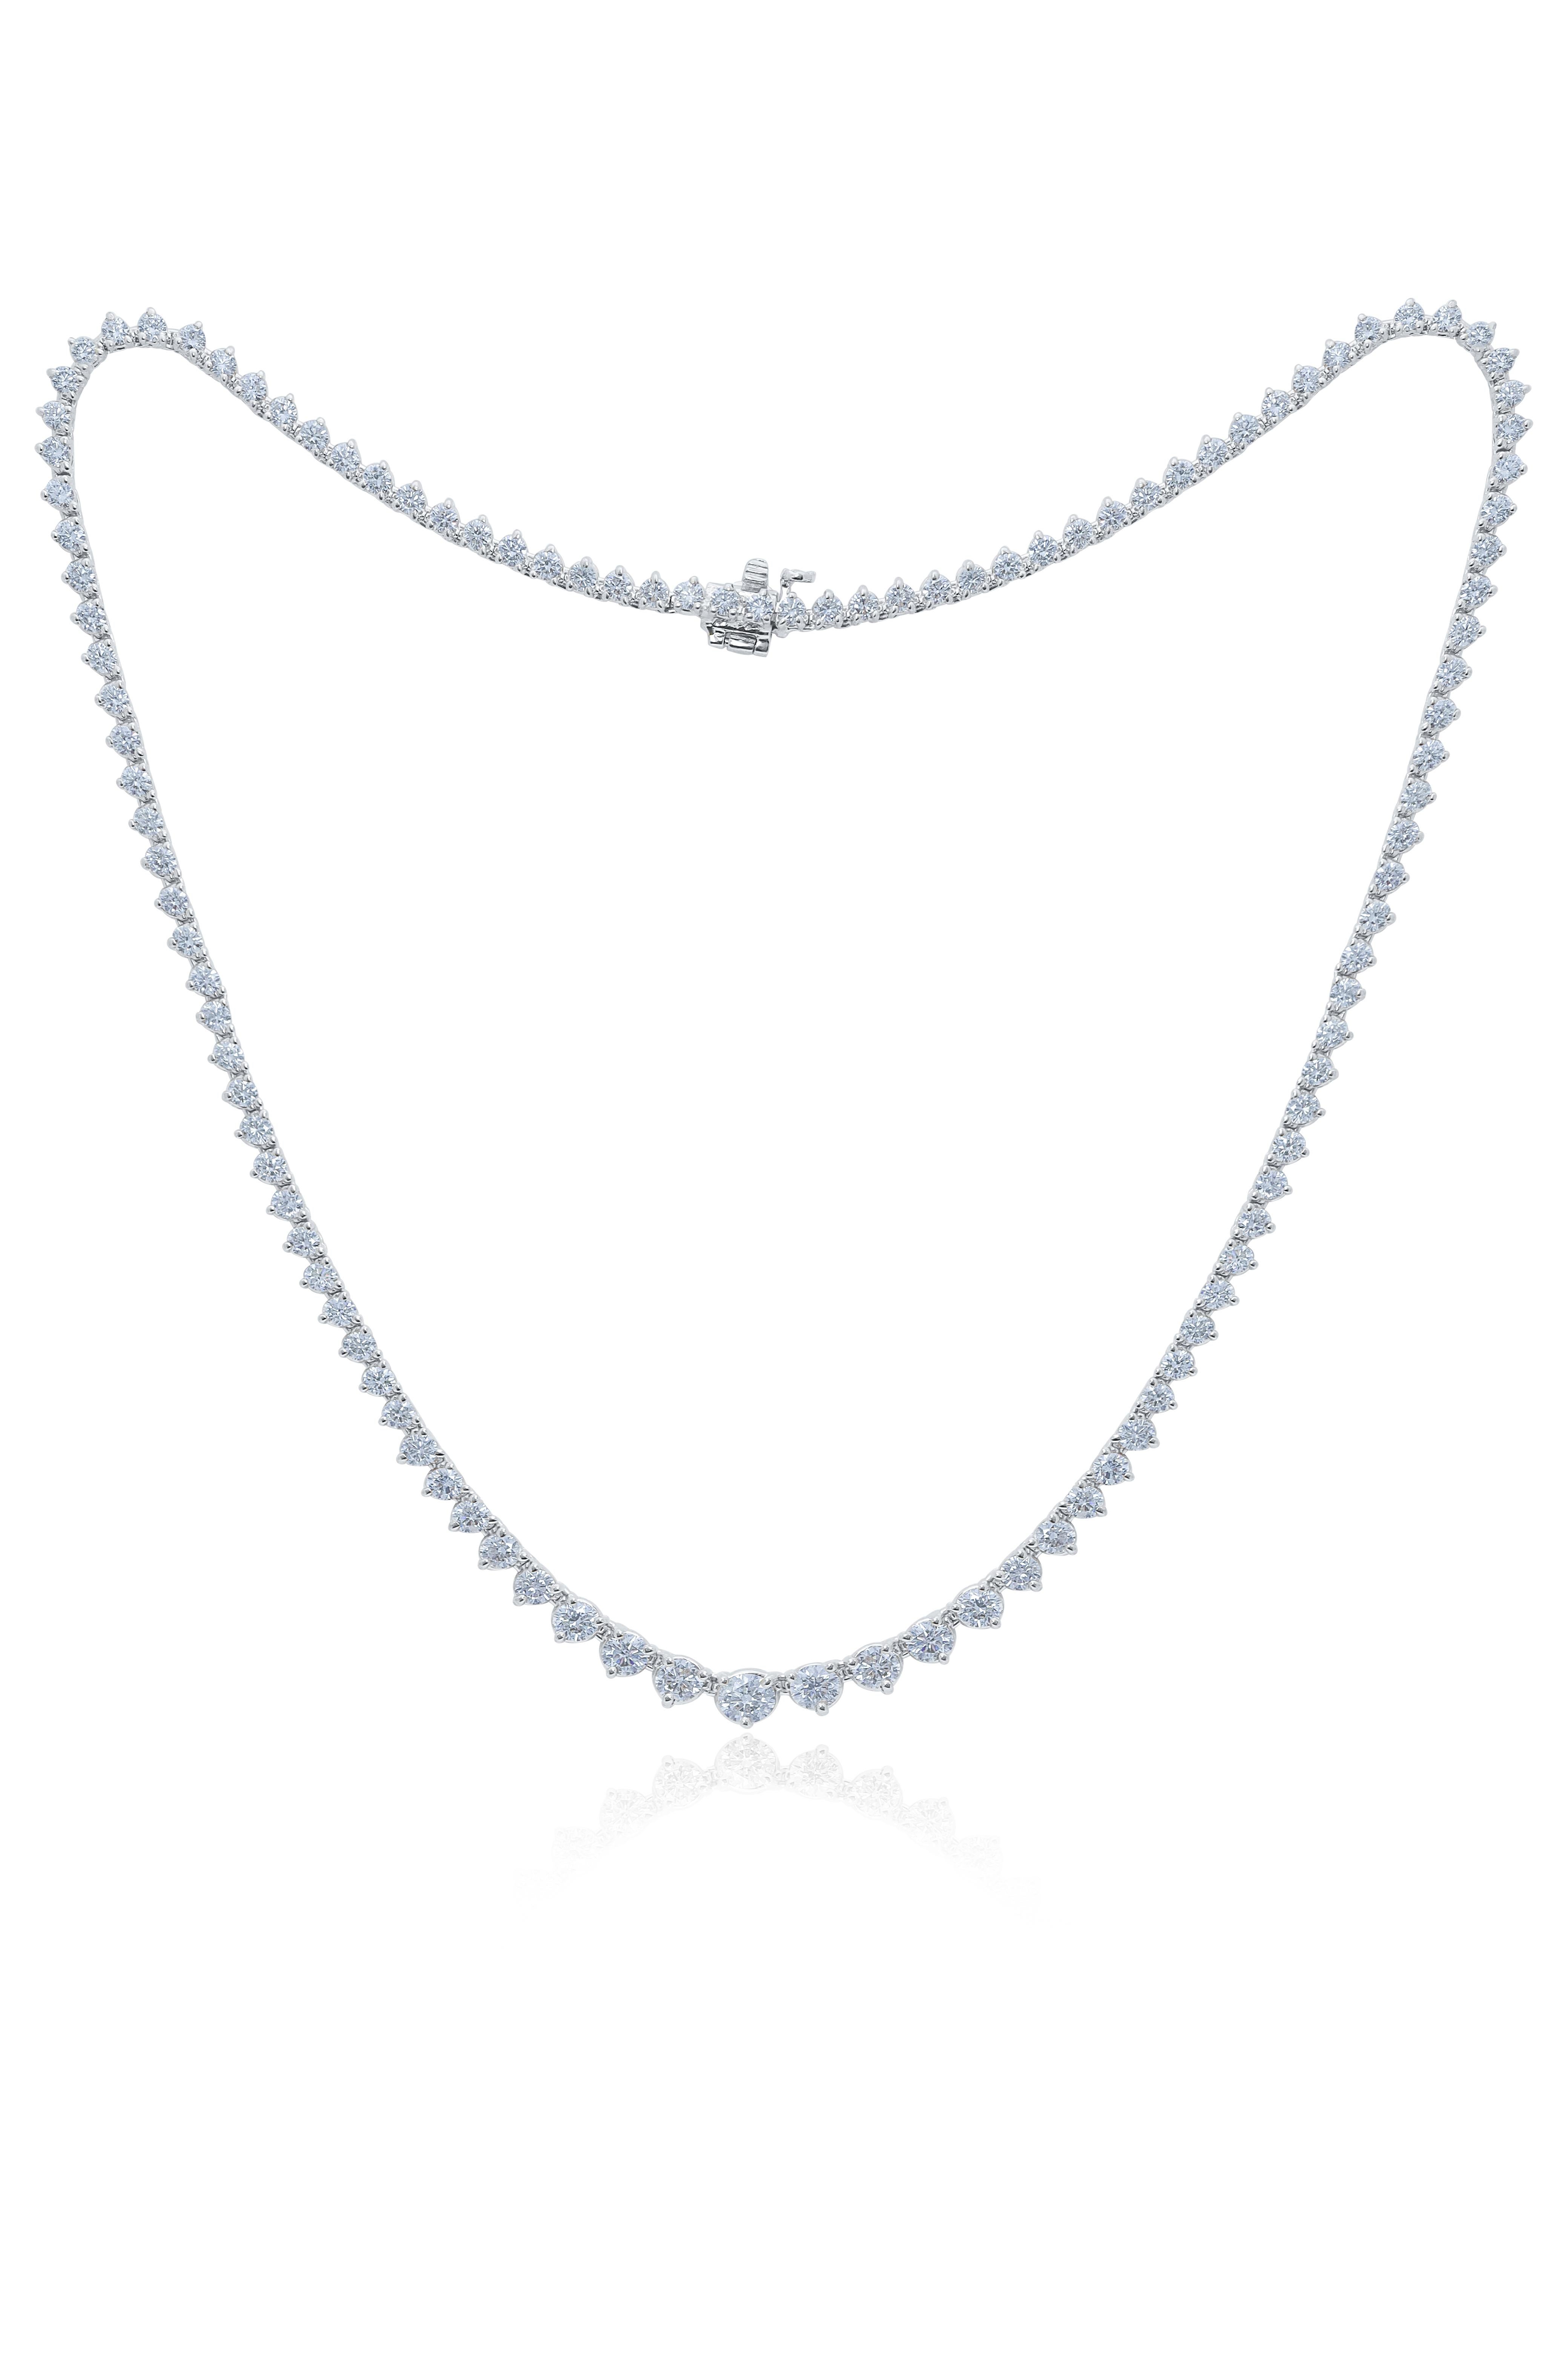 Custom 18k white gold graduated tennis riviera necklace 16.35 cts round diamonds.Color FG SI clarity. Excellent cut. 16.5